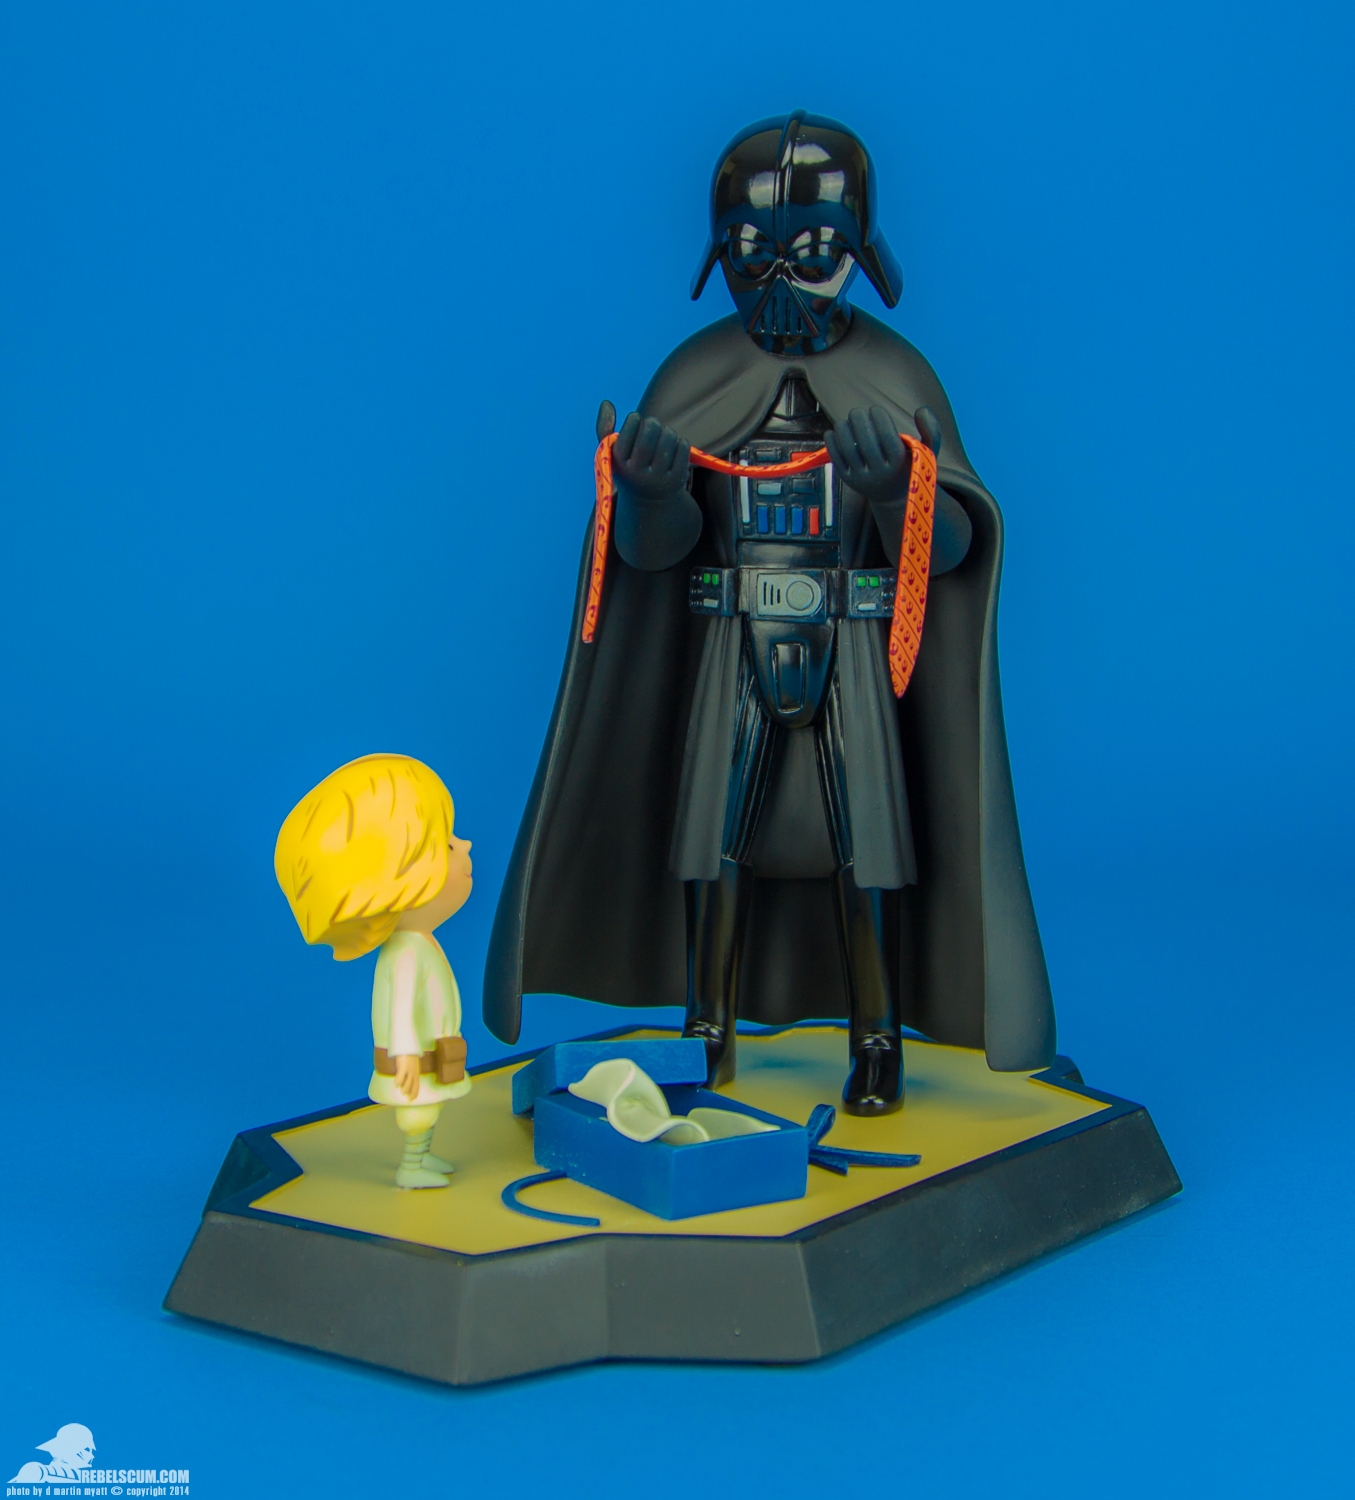 Darth-Vader-And-Son-Deluxe-Maquette-Gentle-Giant-Ltd-002.jpg